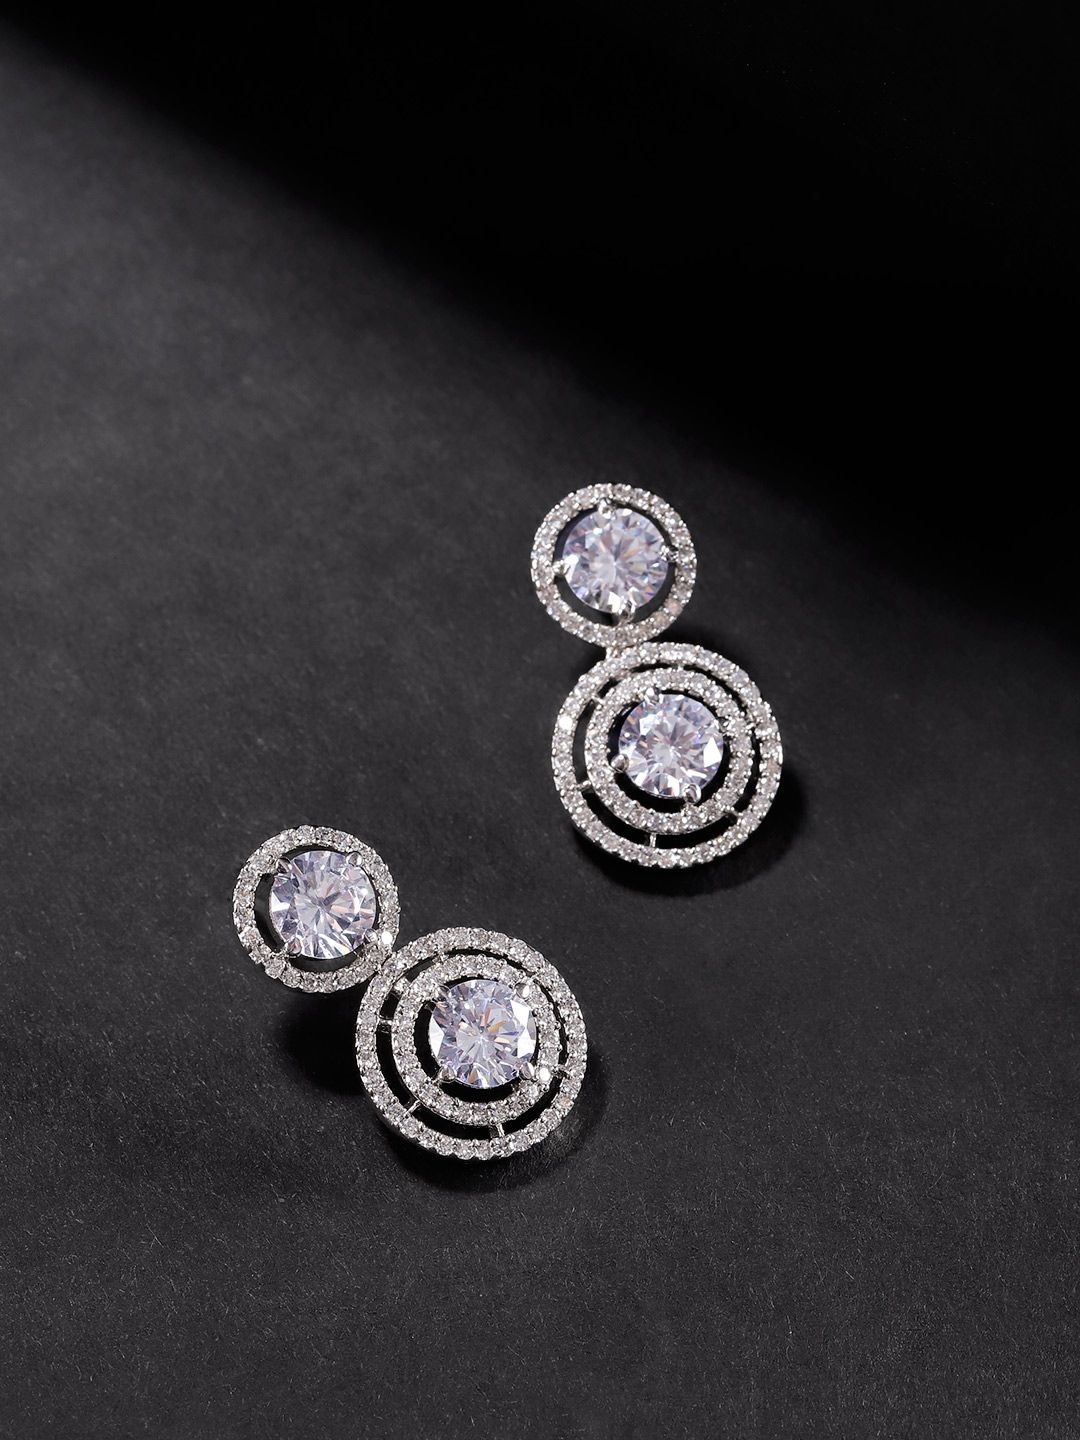 Priyaasi Silver-Toned Rhodium-Plated AD-Studded Handcrafted Circular Drop Earrings Price in India